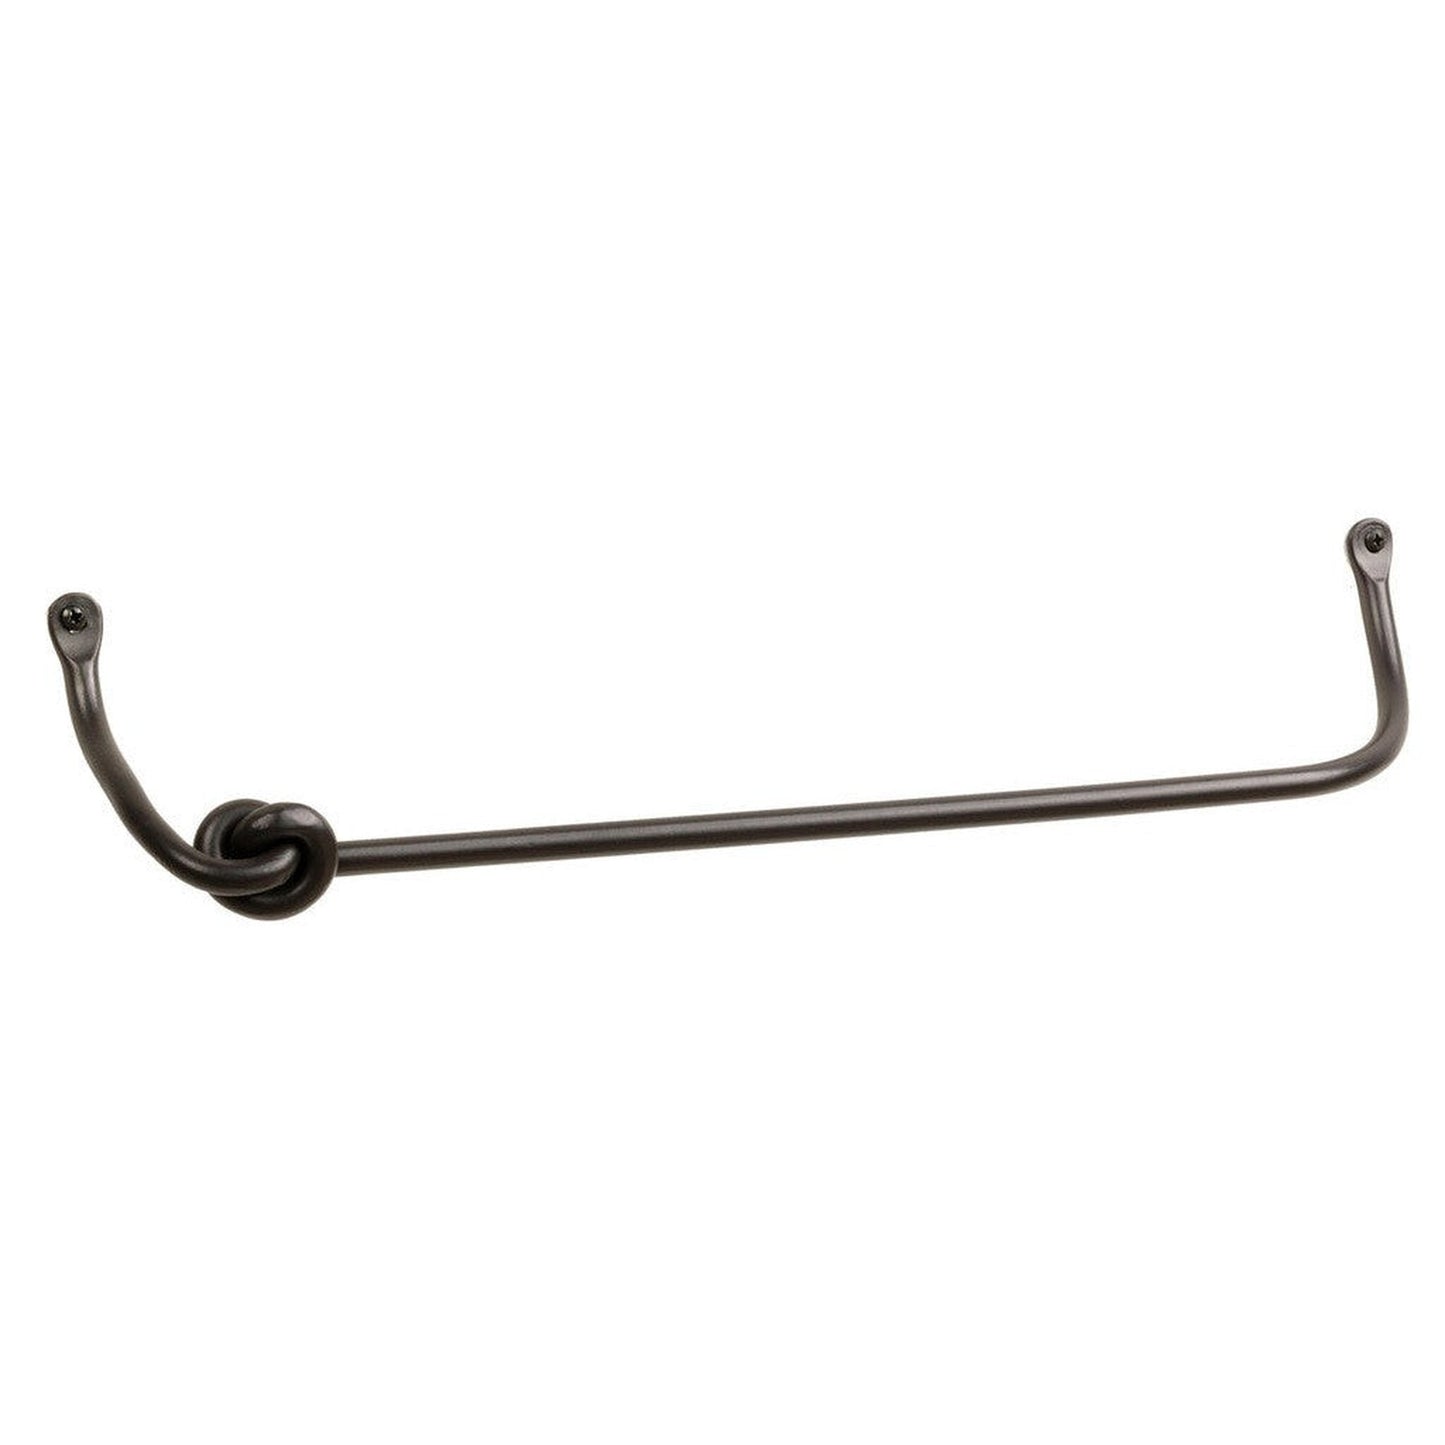 Stone County Ironworks Knot 24" Natural Black Iron Towel Bar With Pewter Iron Accent